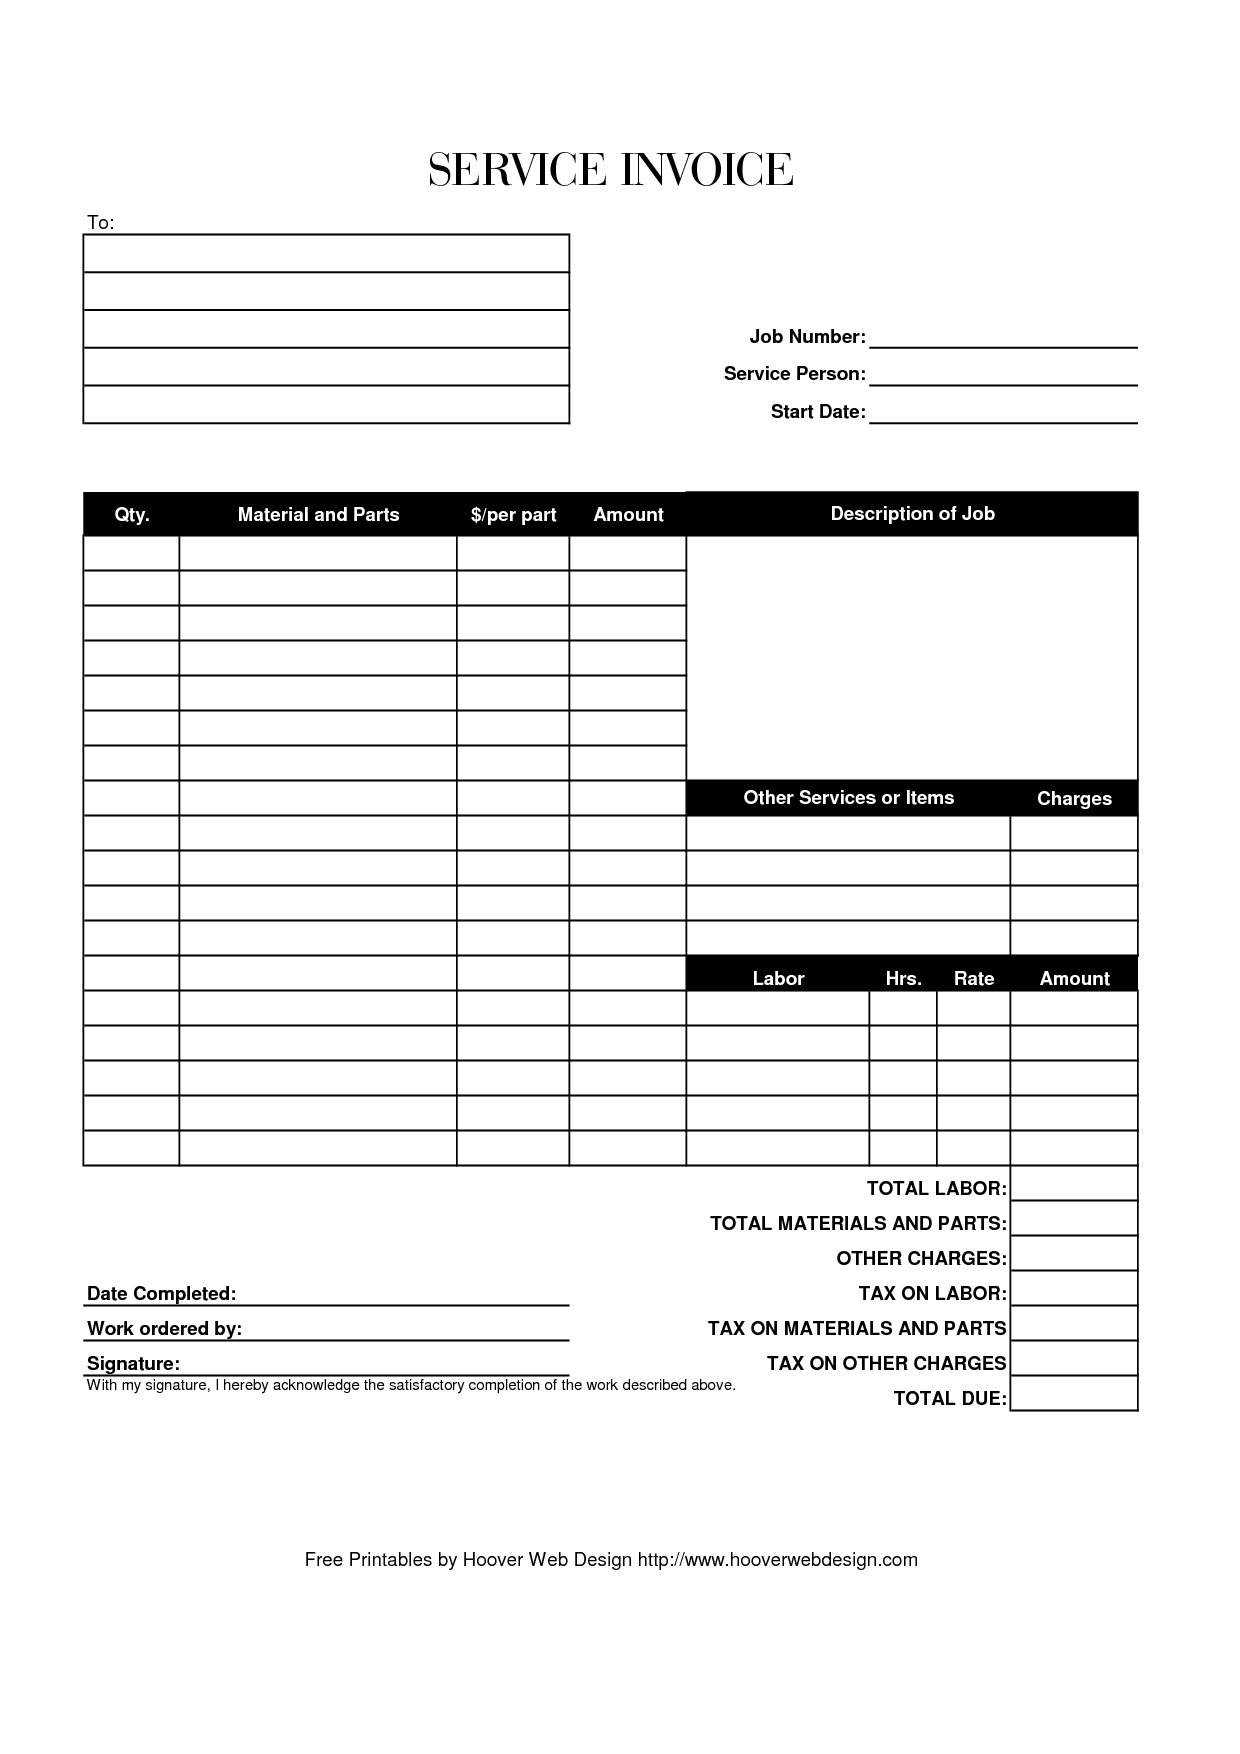 Hoover Receipts - Free Printable Service Invoice Template PDF